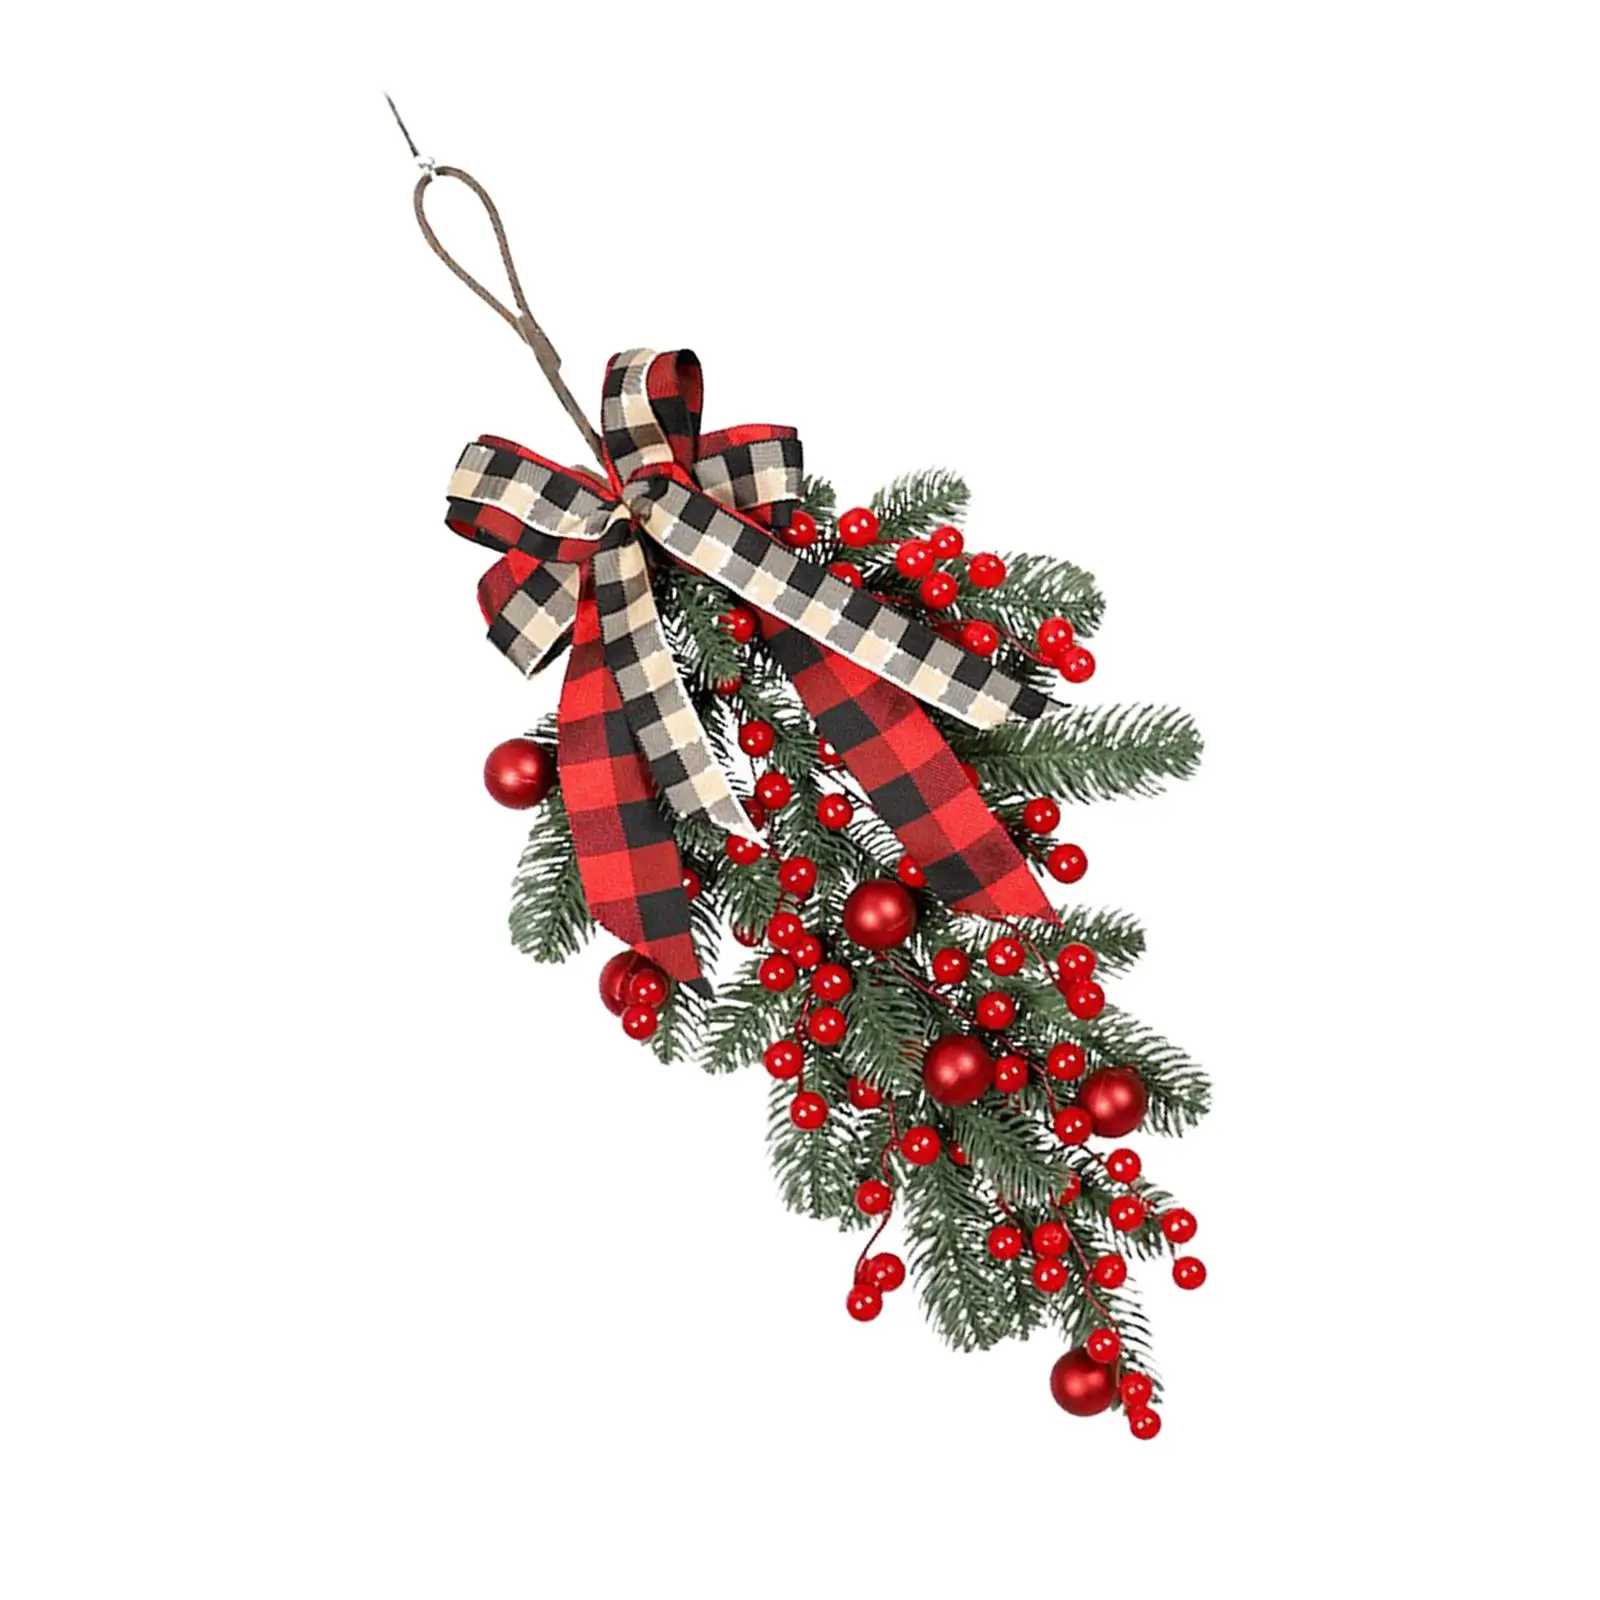 Christmas Wreath Wall Hanging Artificial Flower Branch Red Berries Wreath DIY Xmas Garland for New Year Fireplace Window